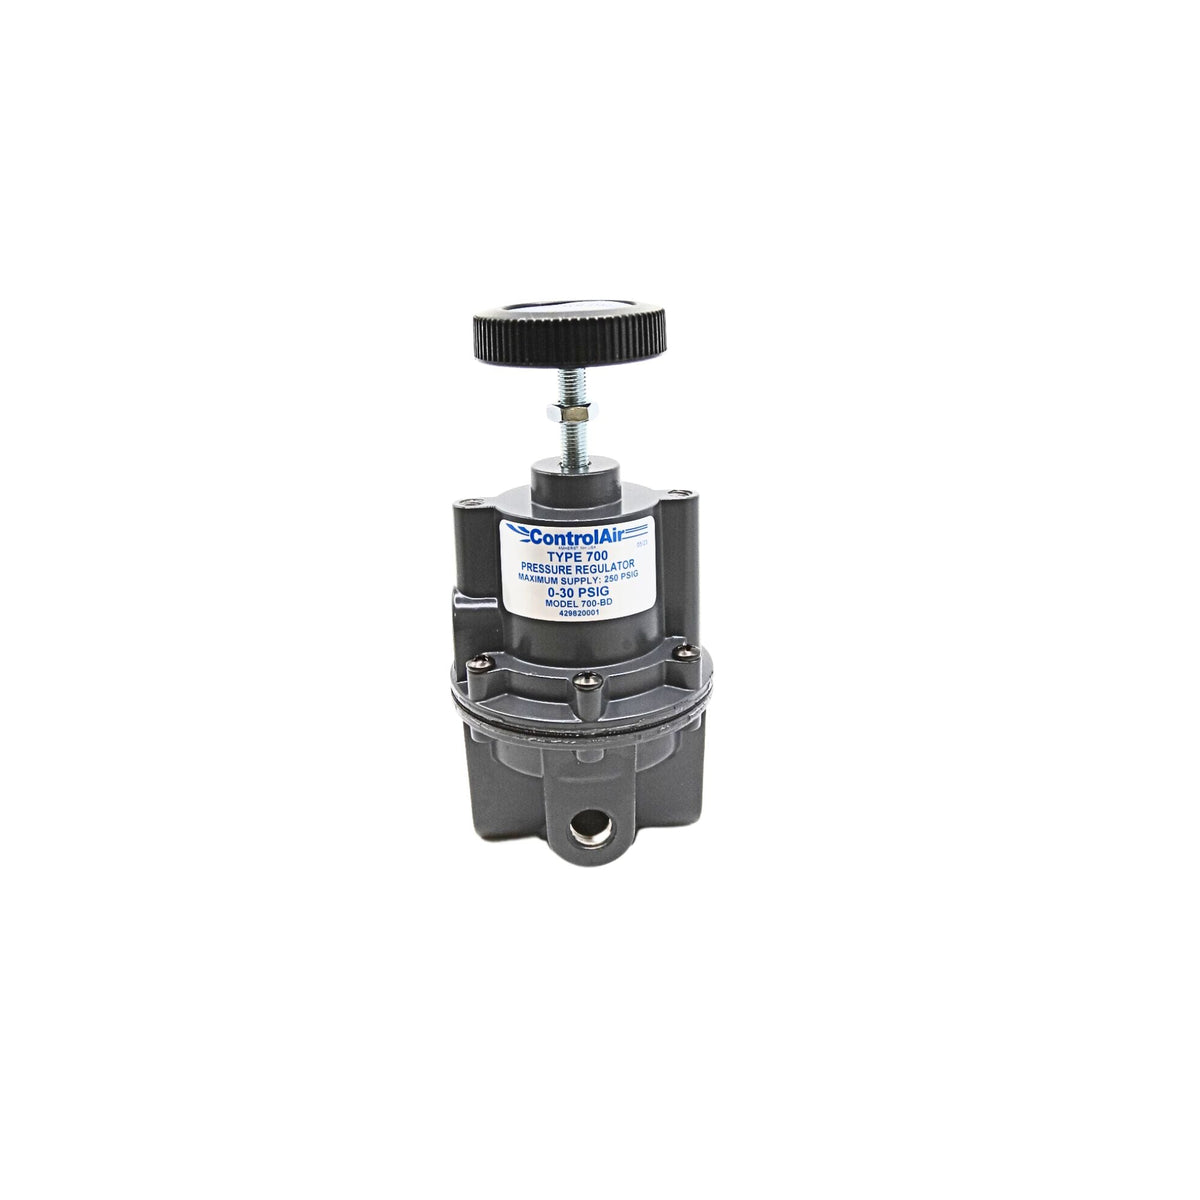 Control Air l Pressure Regulator 1/4 in NPT port, 0-30PSI | 700-BD used on control air product line - front view